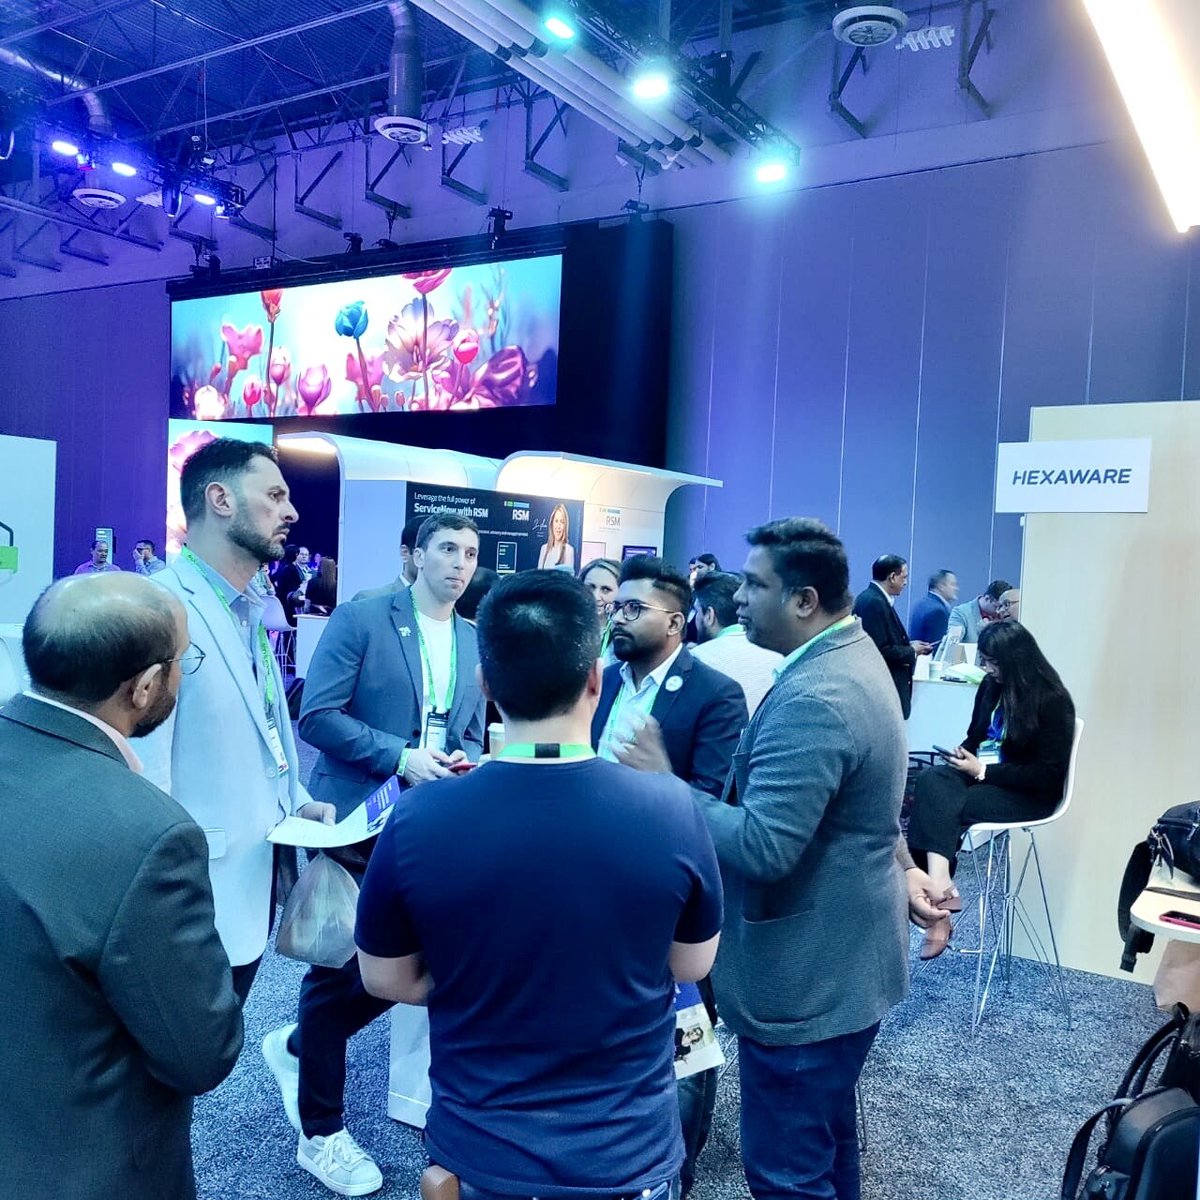 We had an electrifying day at the Hexaware event booth #5448 at Day 1. Our interactive sessions were buzzing with energy, packed with enthusiastic participants eager to dive deep into the latest innovations and solutions. Stay tuned for more event highlights! #Know24 #ServiceNow